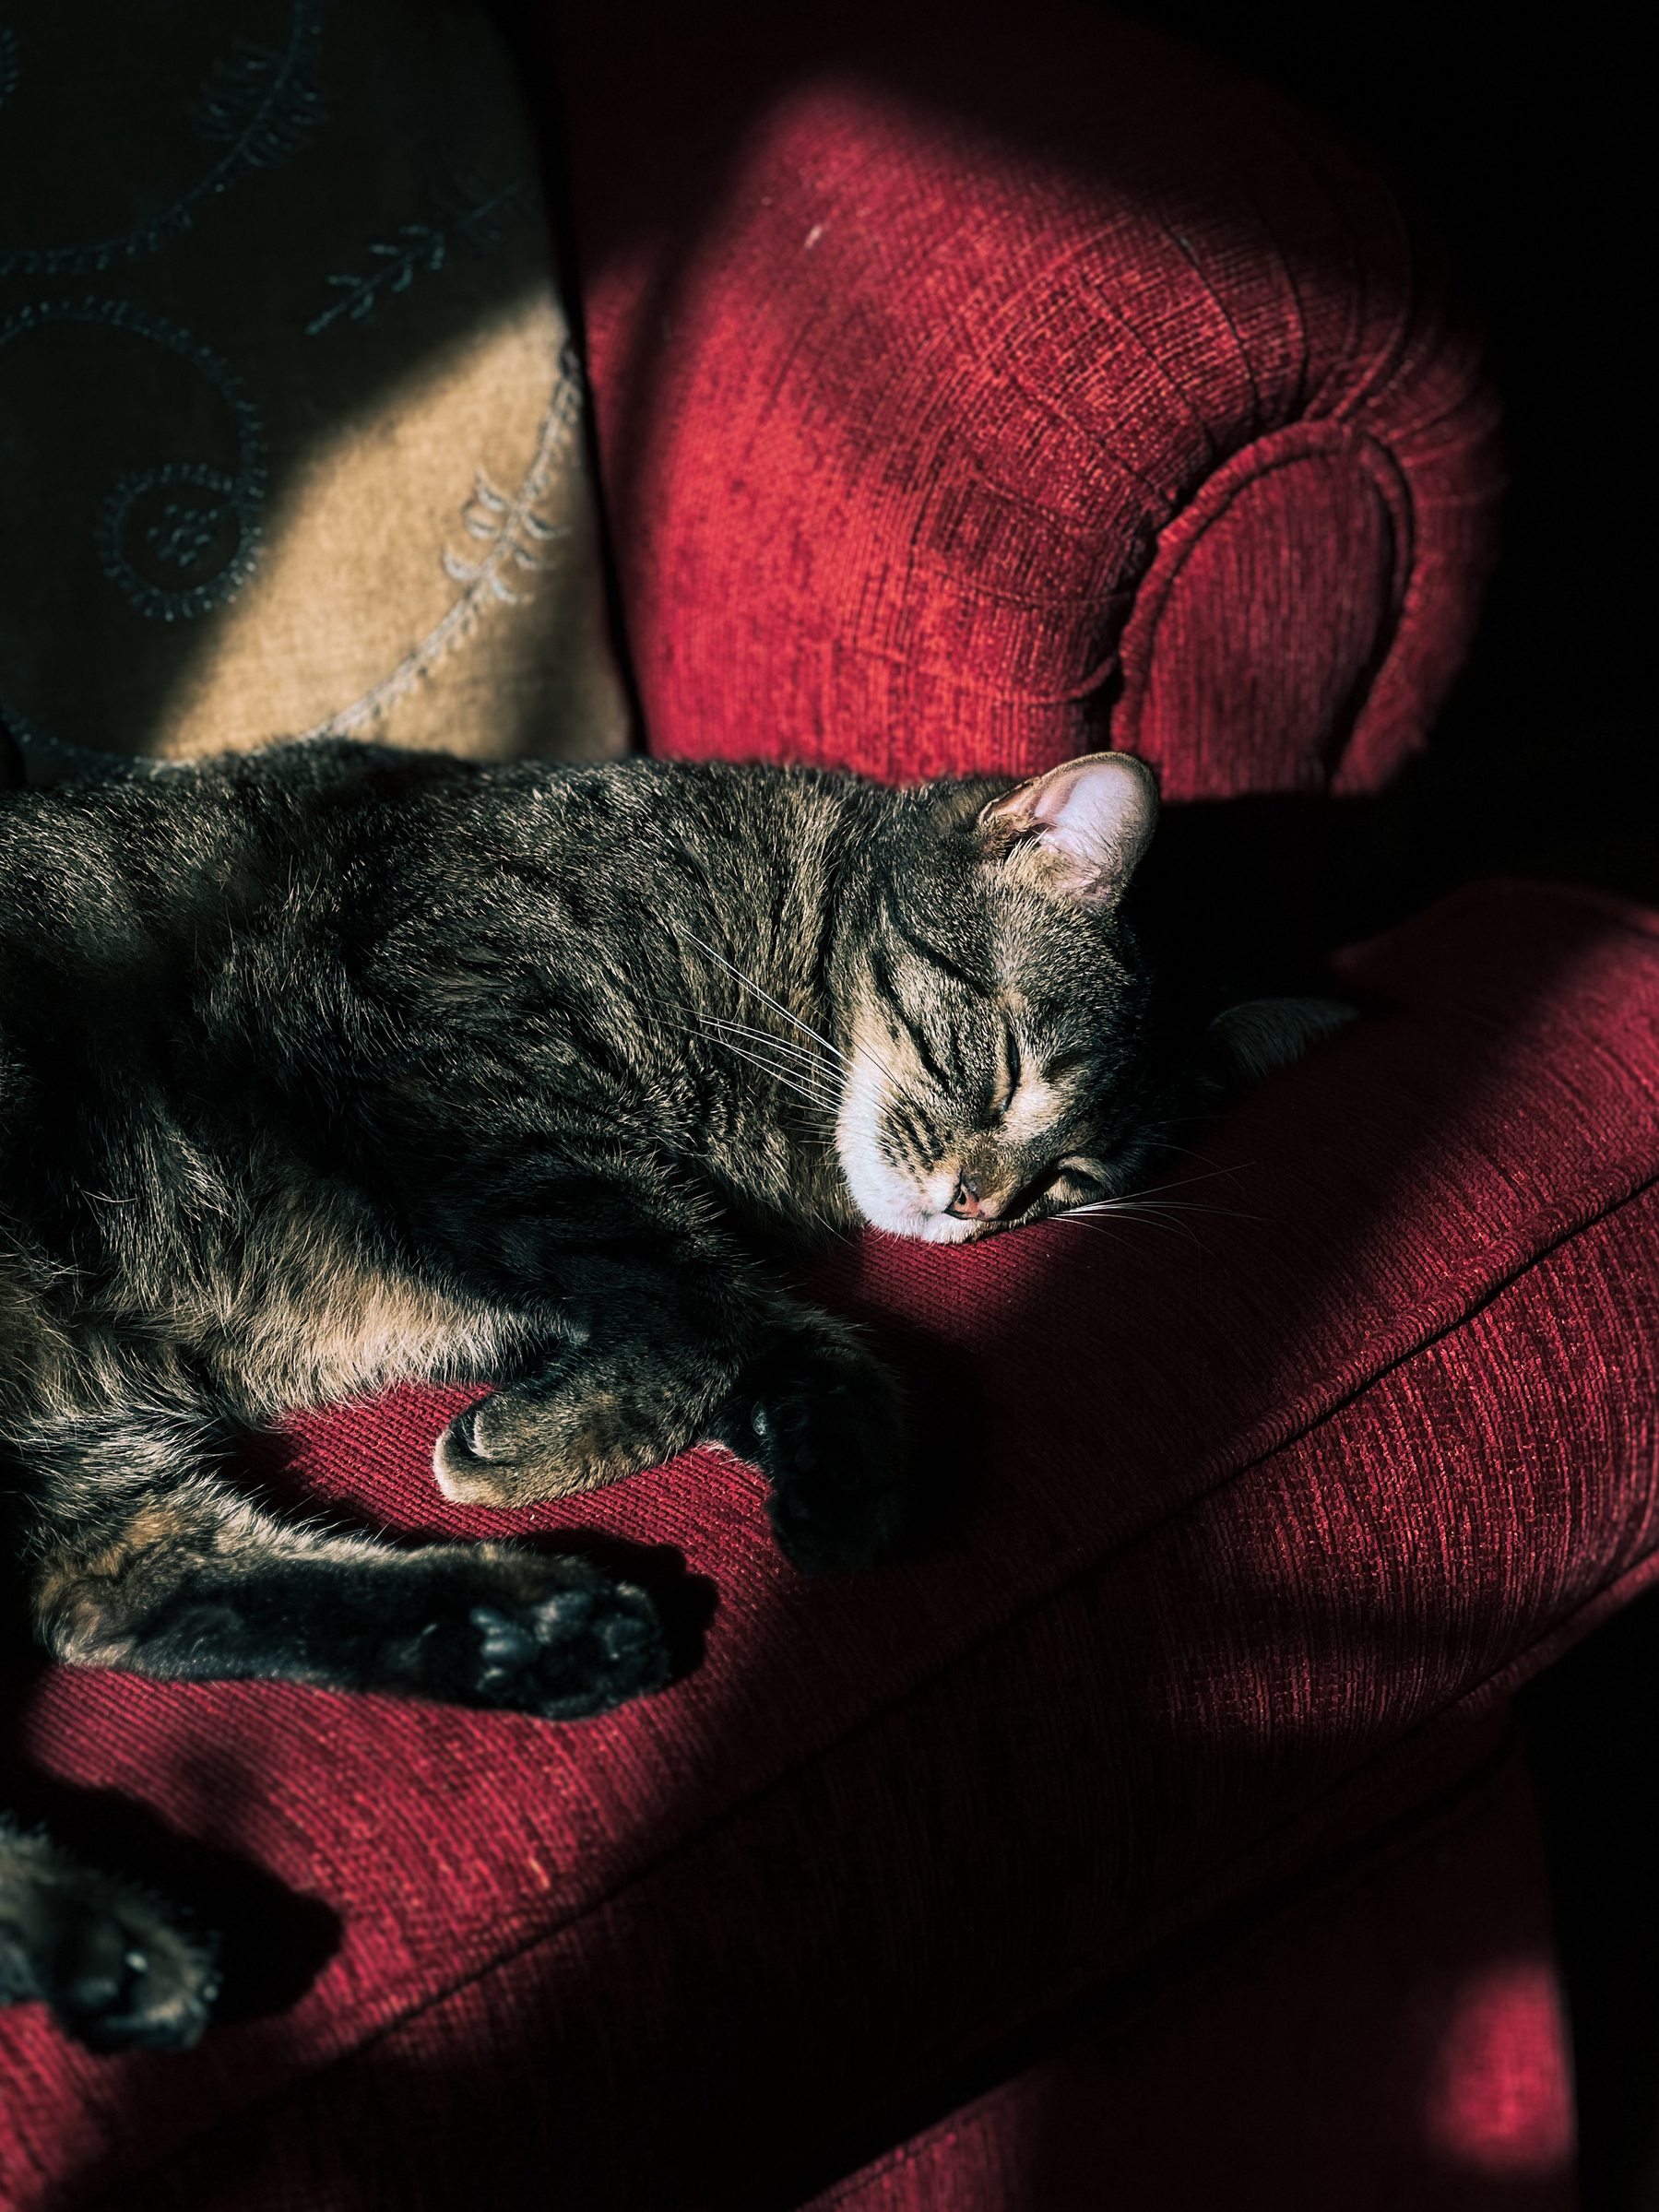 A cat sleeps on a red sofa in a beam of sunlight.